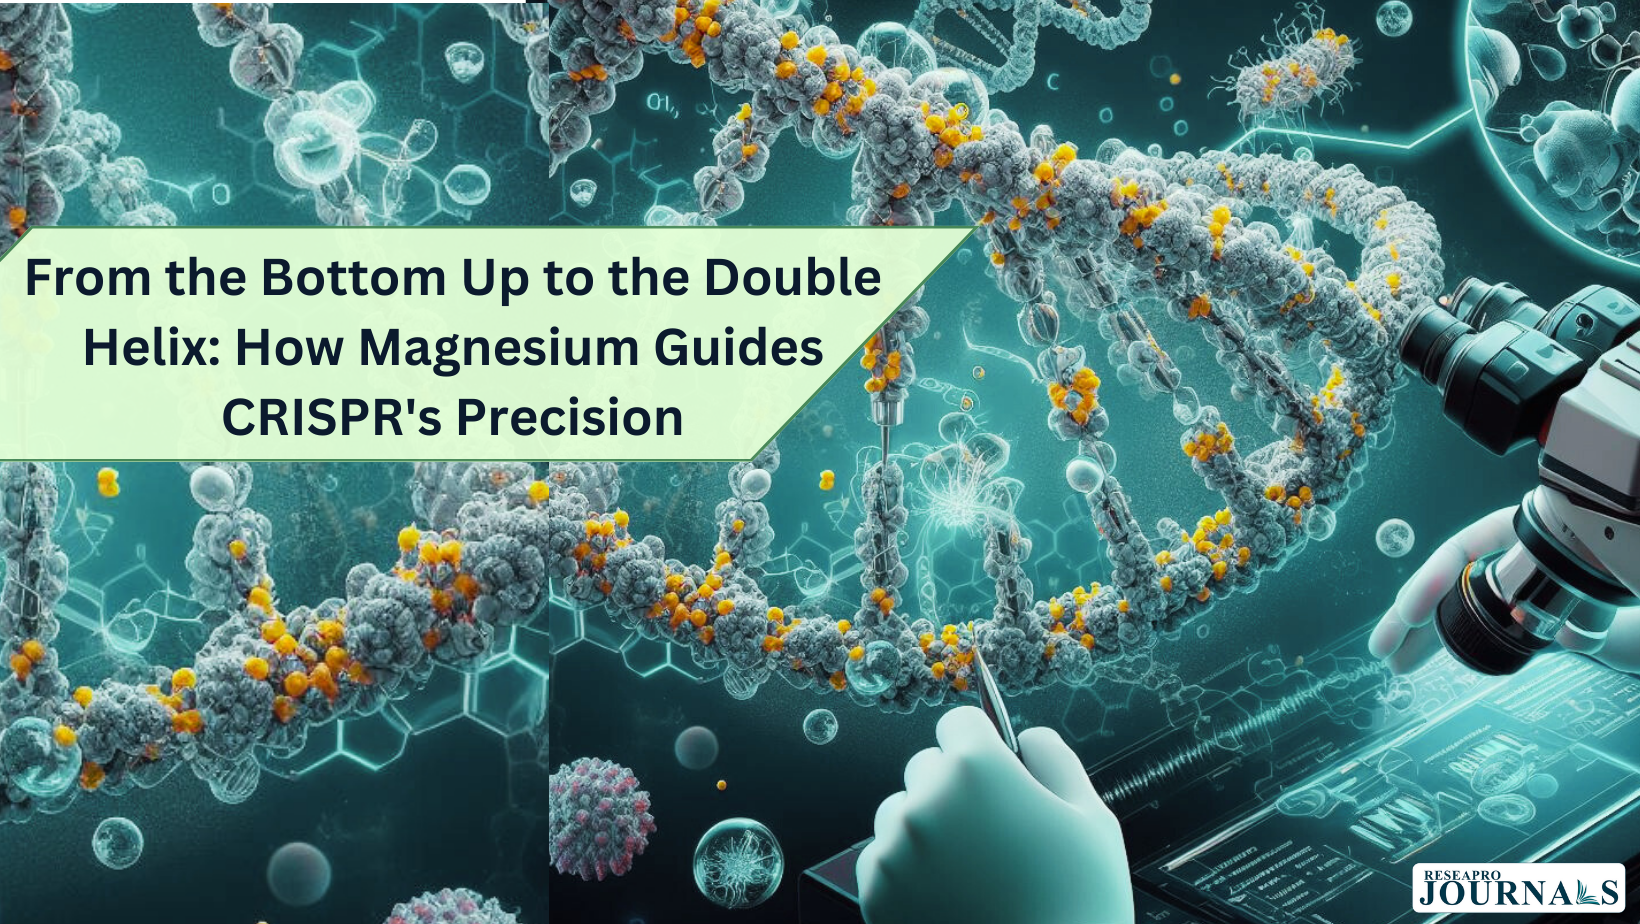 From the Bottom Up to the Double Helix: How Magnesium Guides CRISPR’s Precision